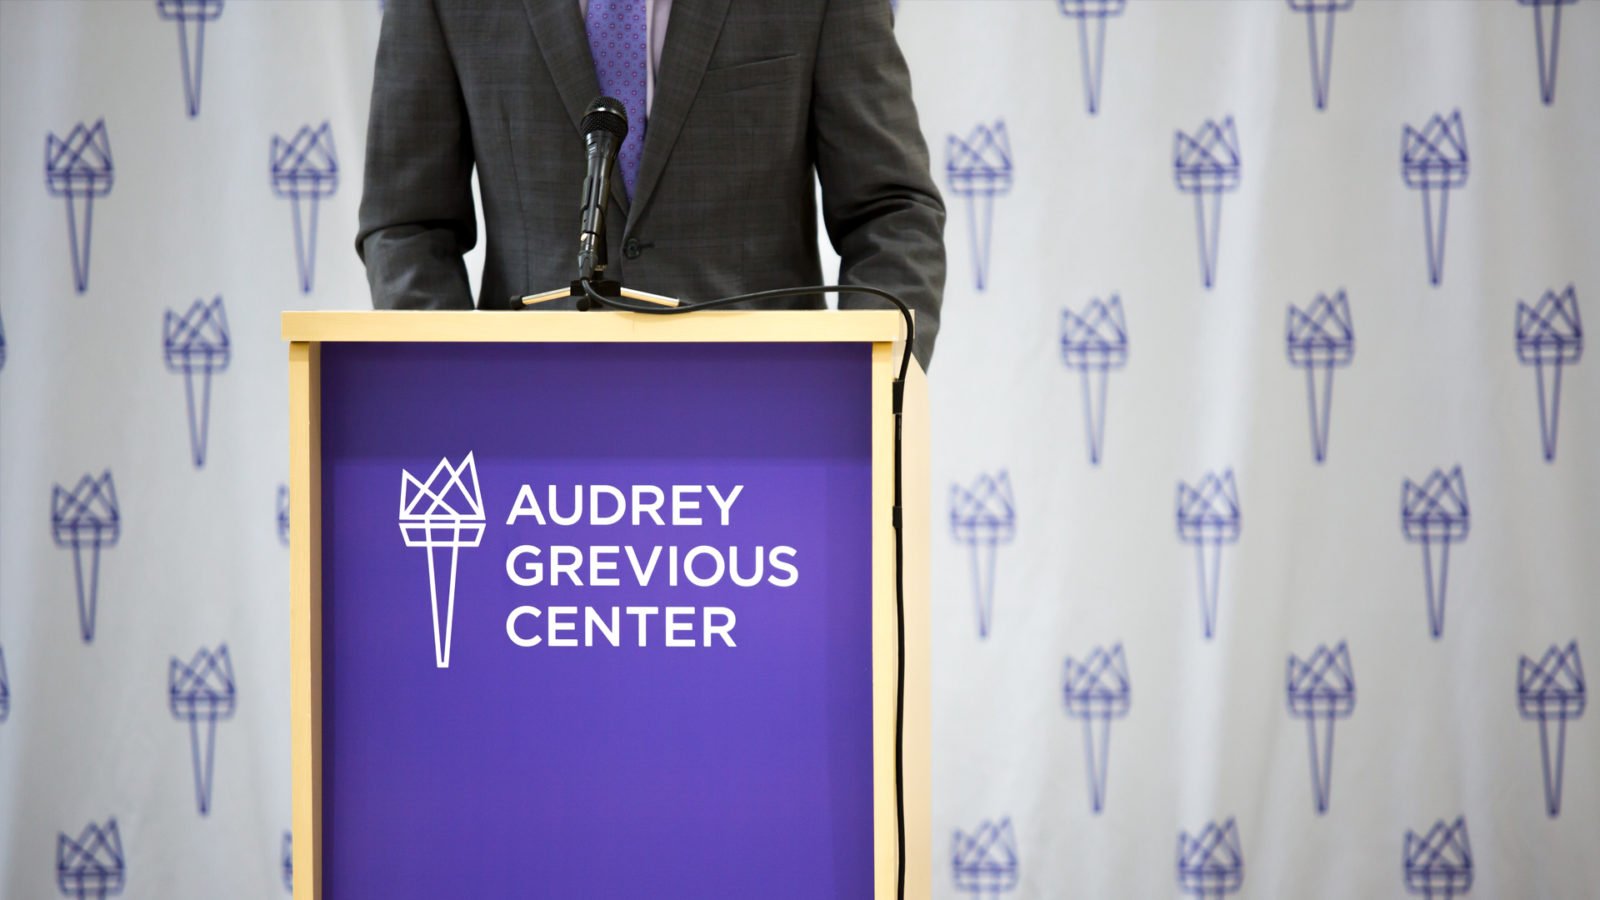 Brand Identity and podium for the Audrey Grevious Center School